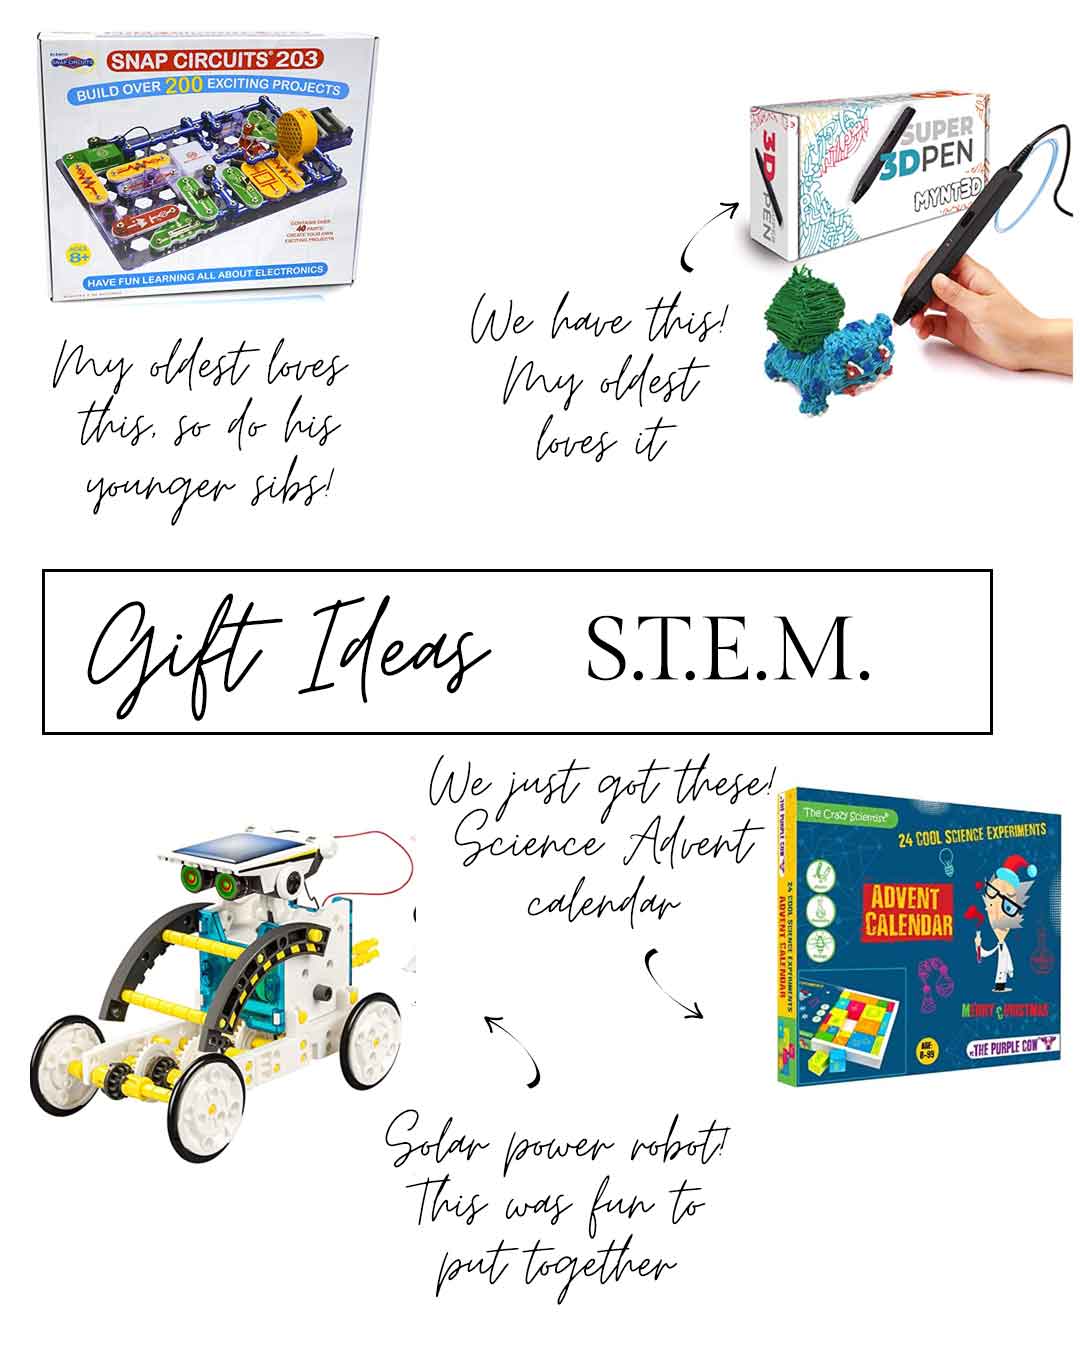 STEM gift ideas for kids boys girls science affordable amazon